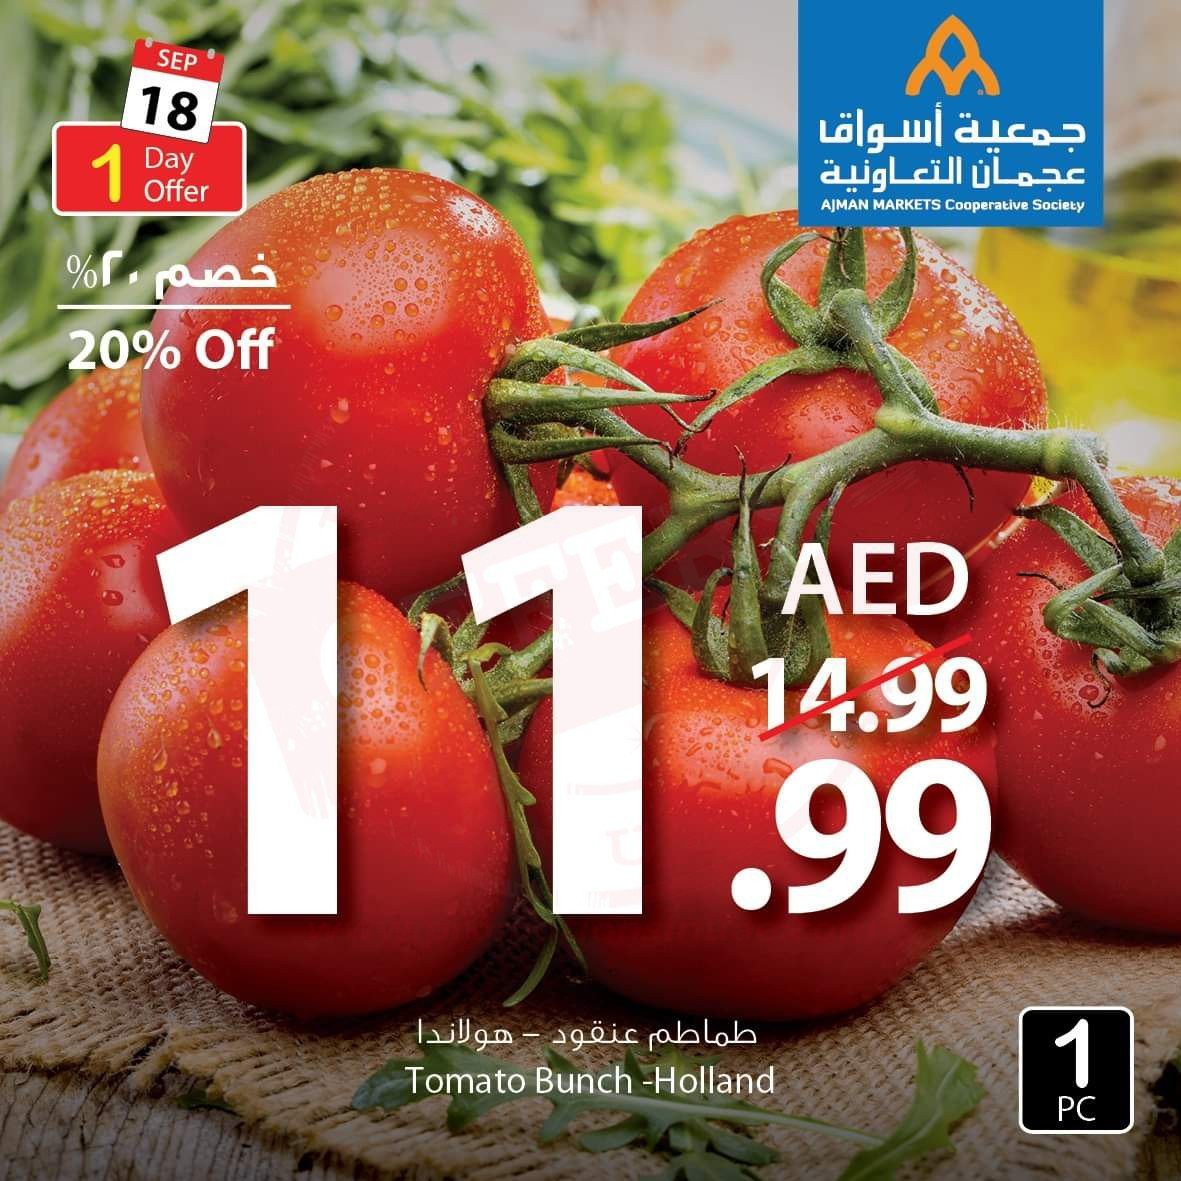 FB IMG 1568800289908 1 Amazing "One Day" Offer!! Ajman Coop